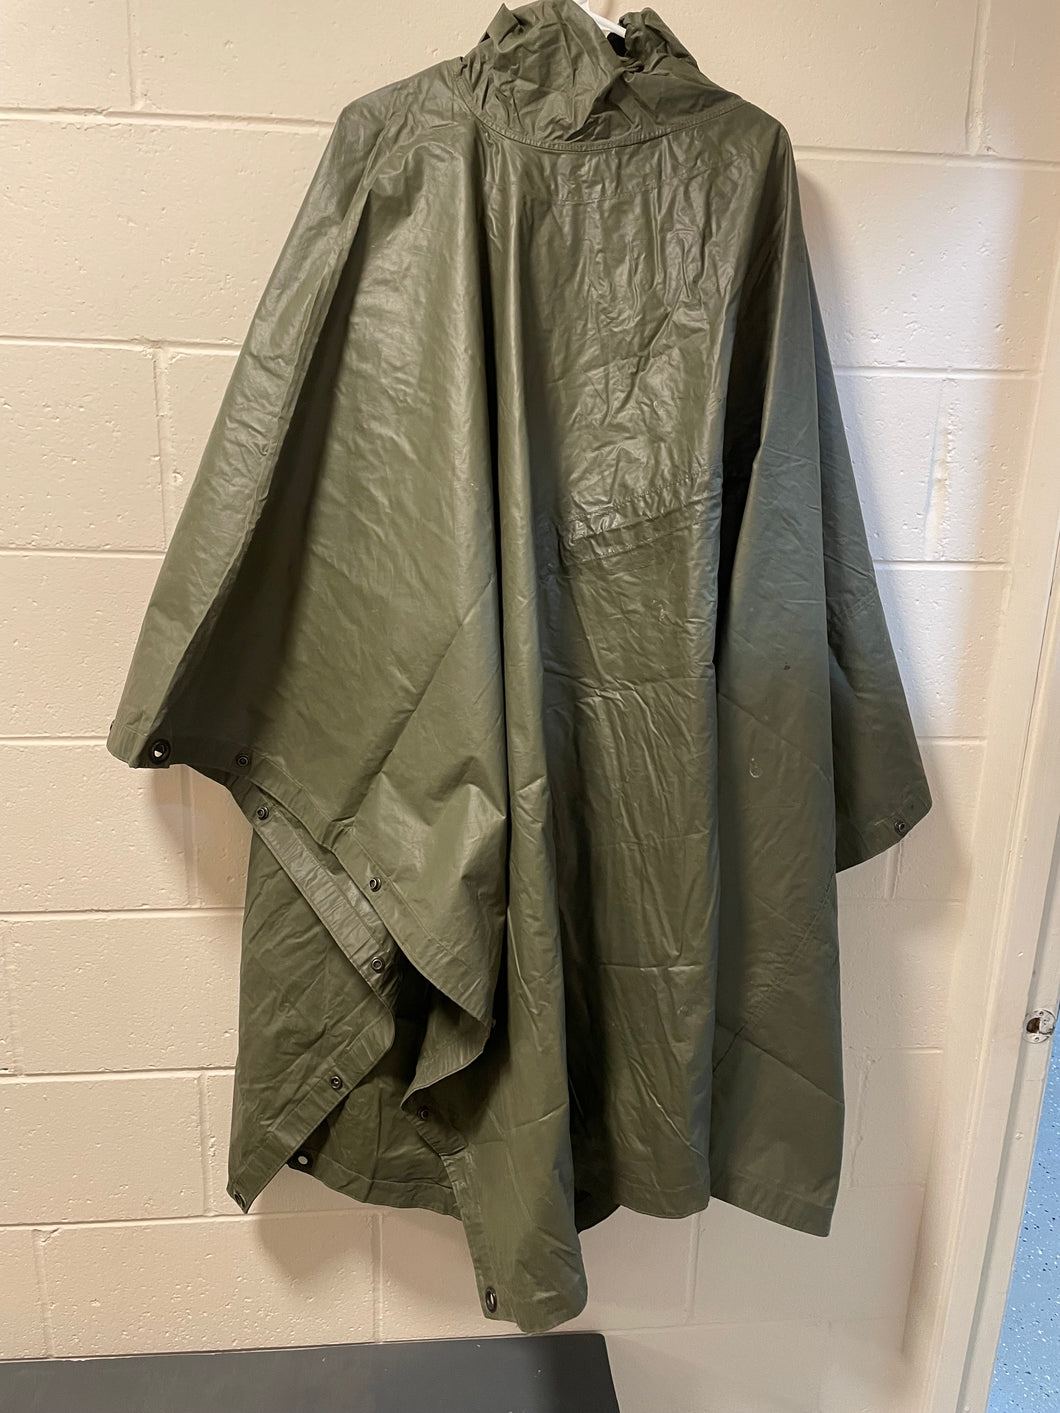 FRONT VIEW OF HANGING PONCHO